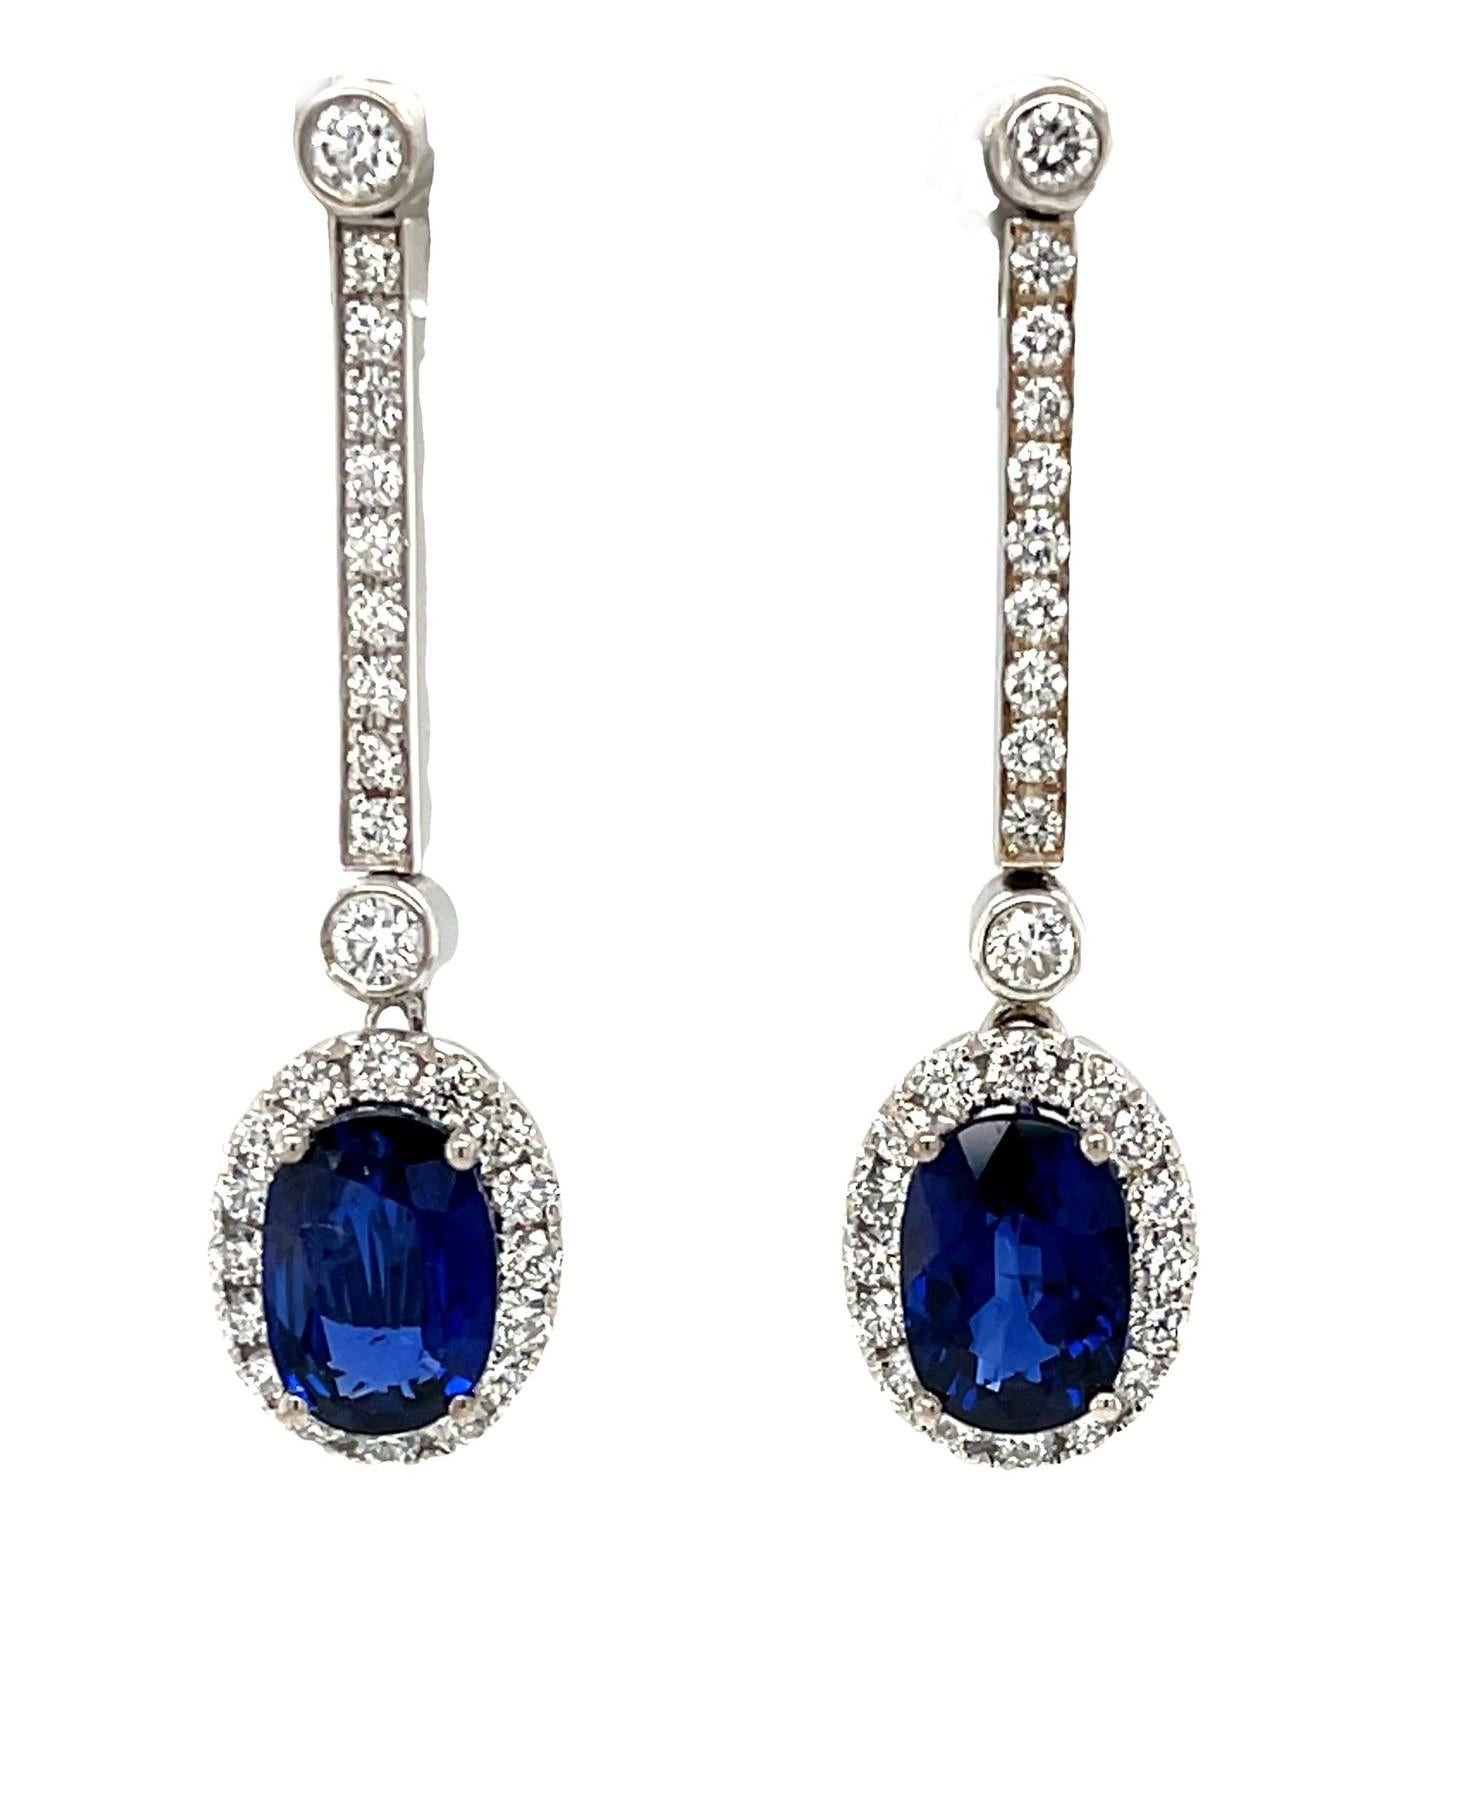 These stunning and beautifully versatile earrings feature brilliant sapphire and diamond drops suspended from an elegant line of sparkling diamonds! The perfectly matched oval sapphires are very fine quality with gorgeous royal blue color. Set in